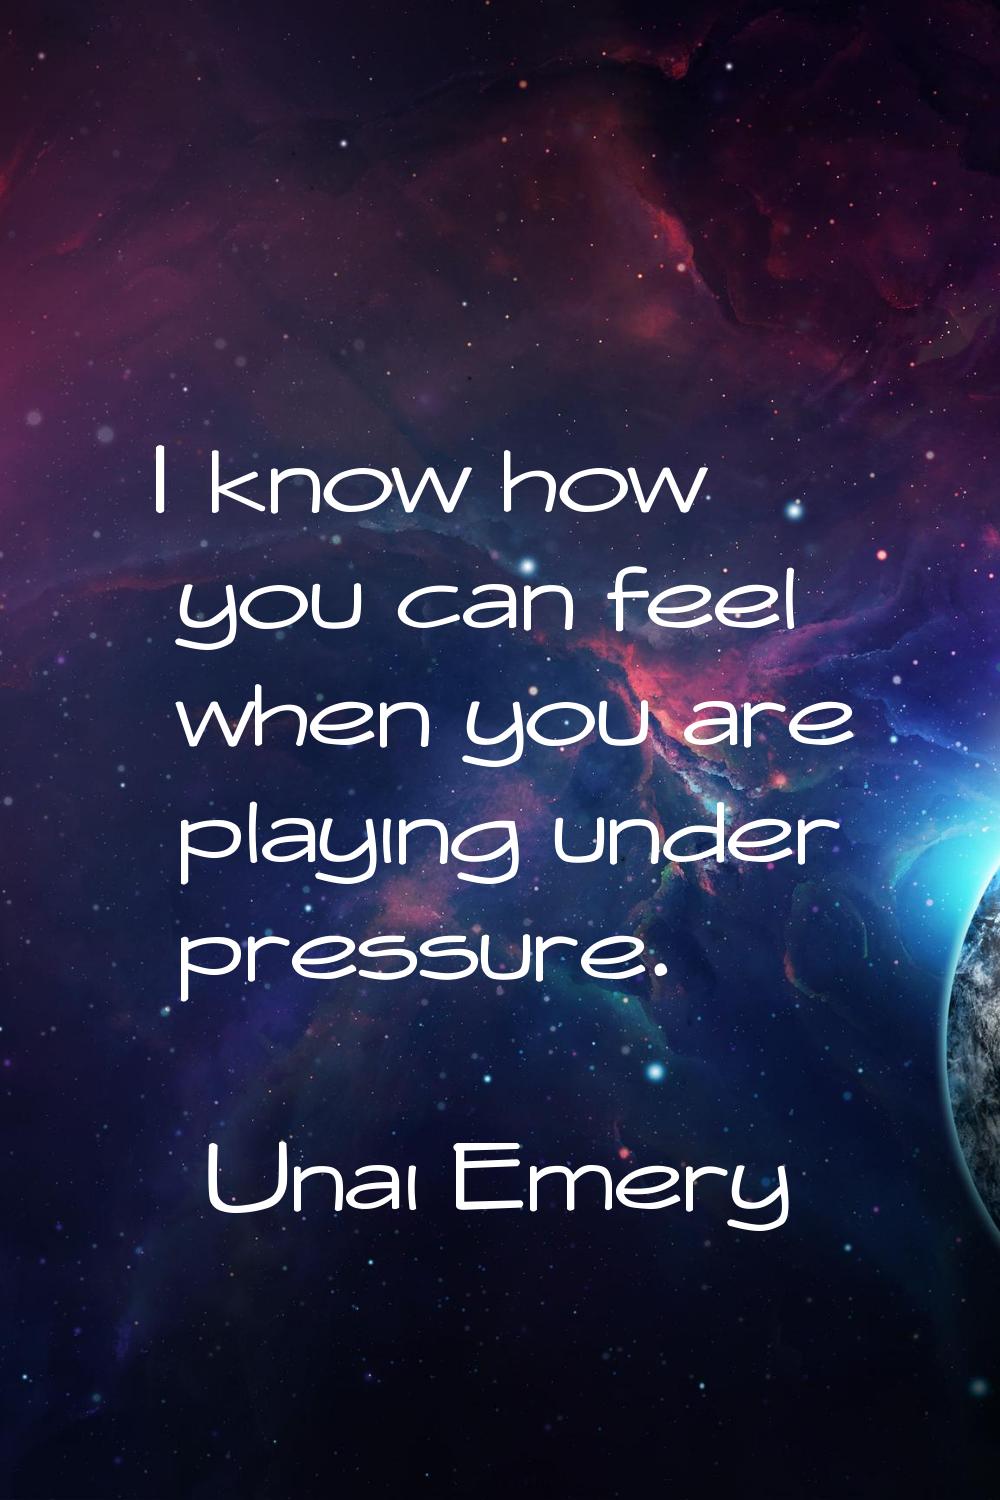 I know how you can feel when you are playing under pressure.